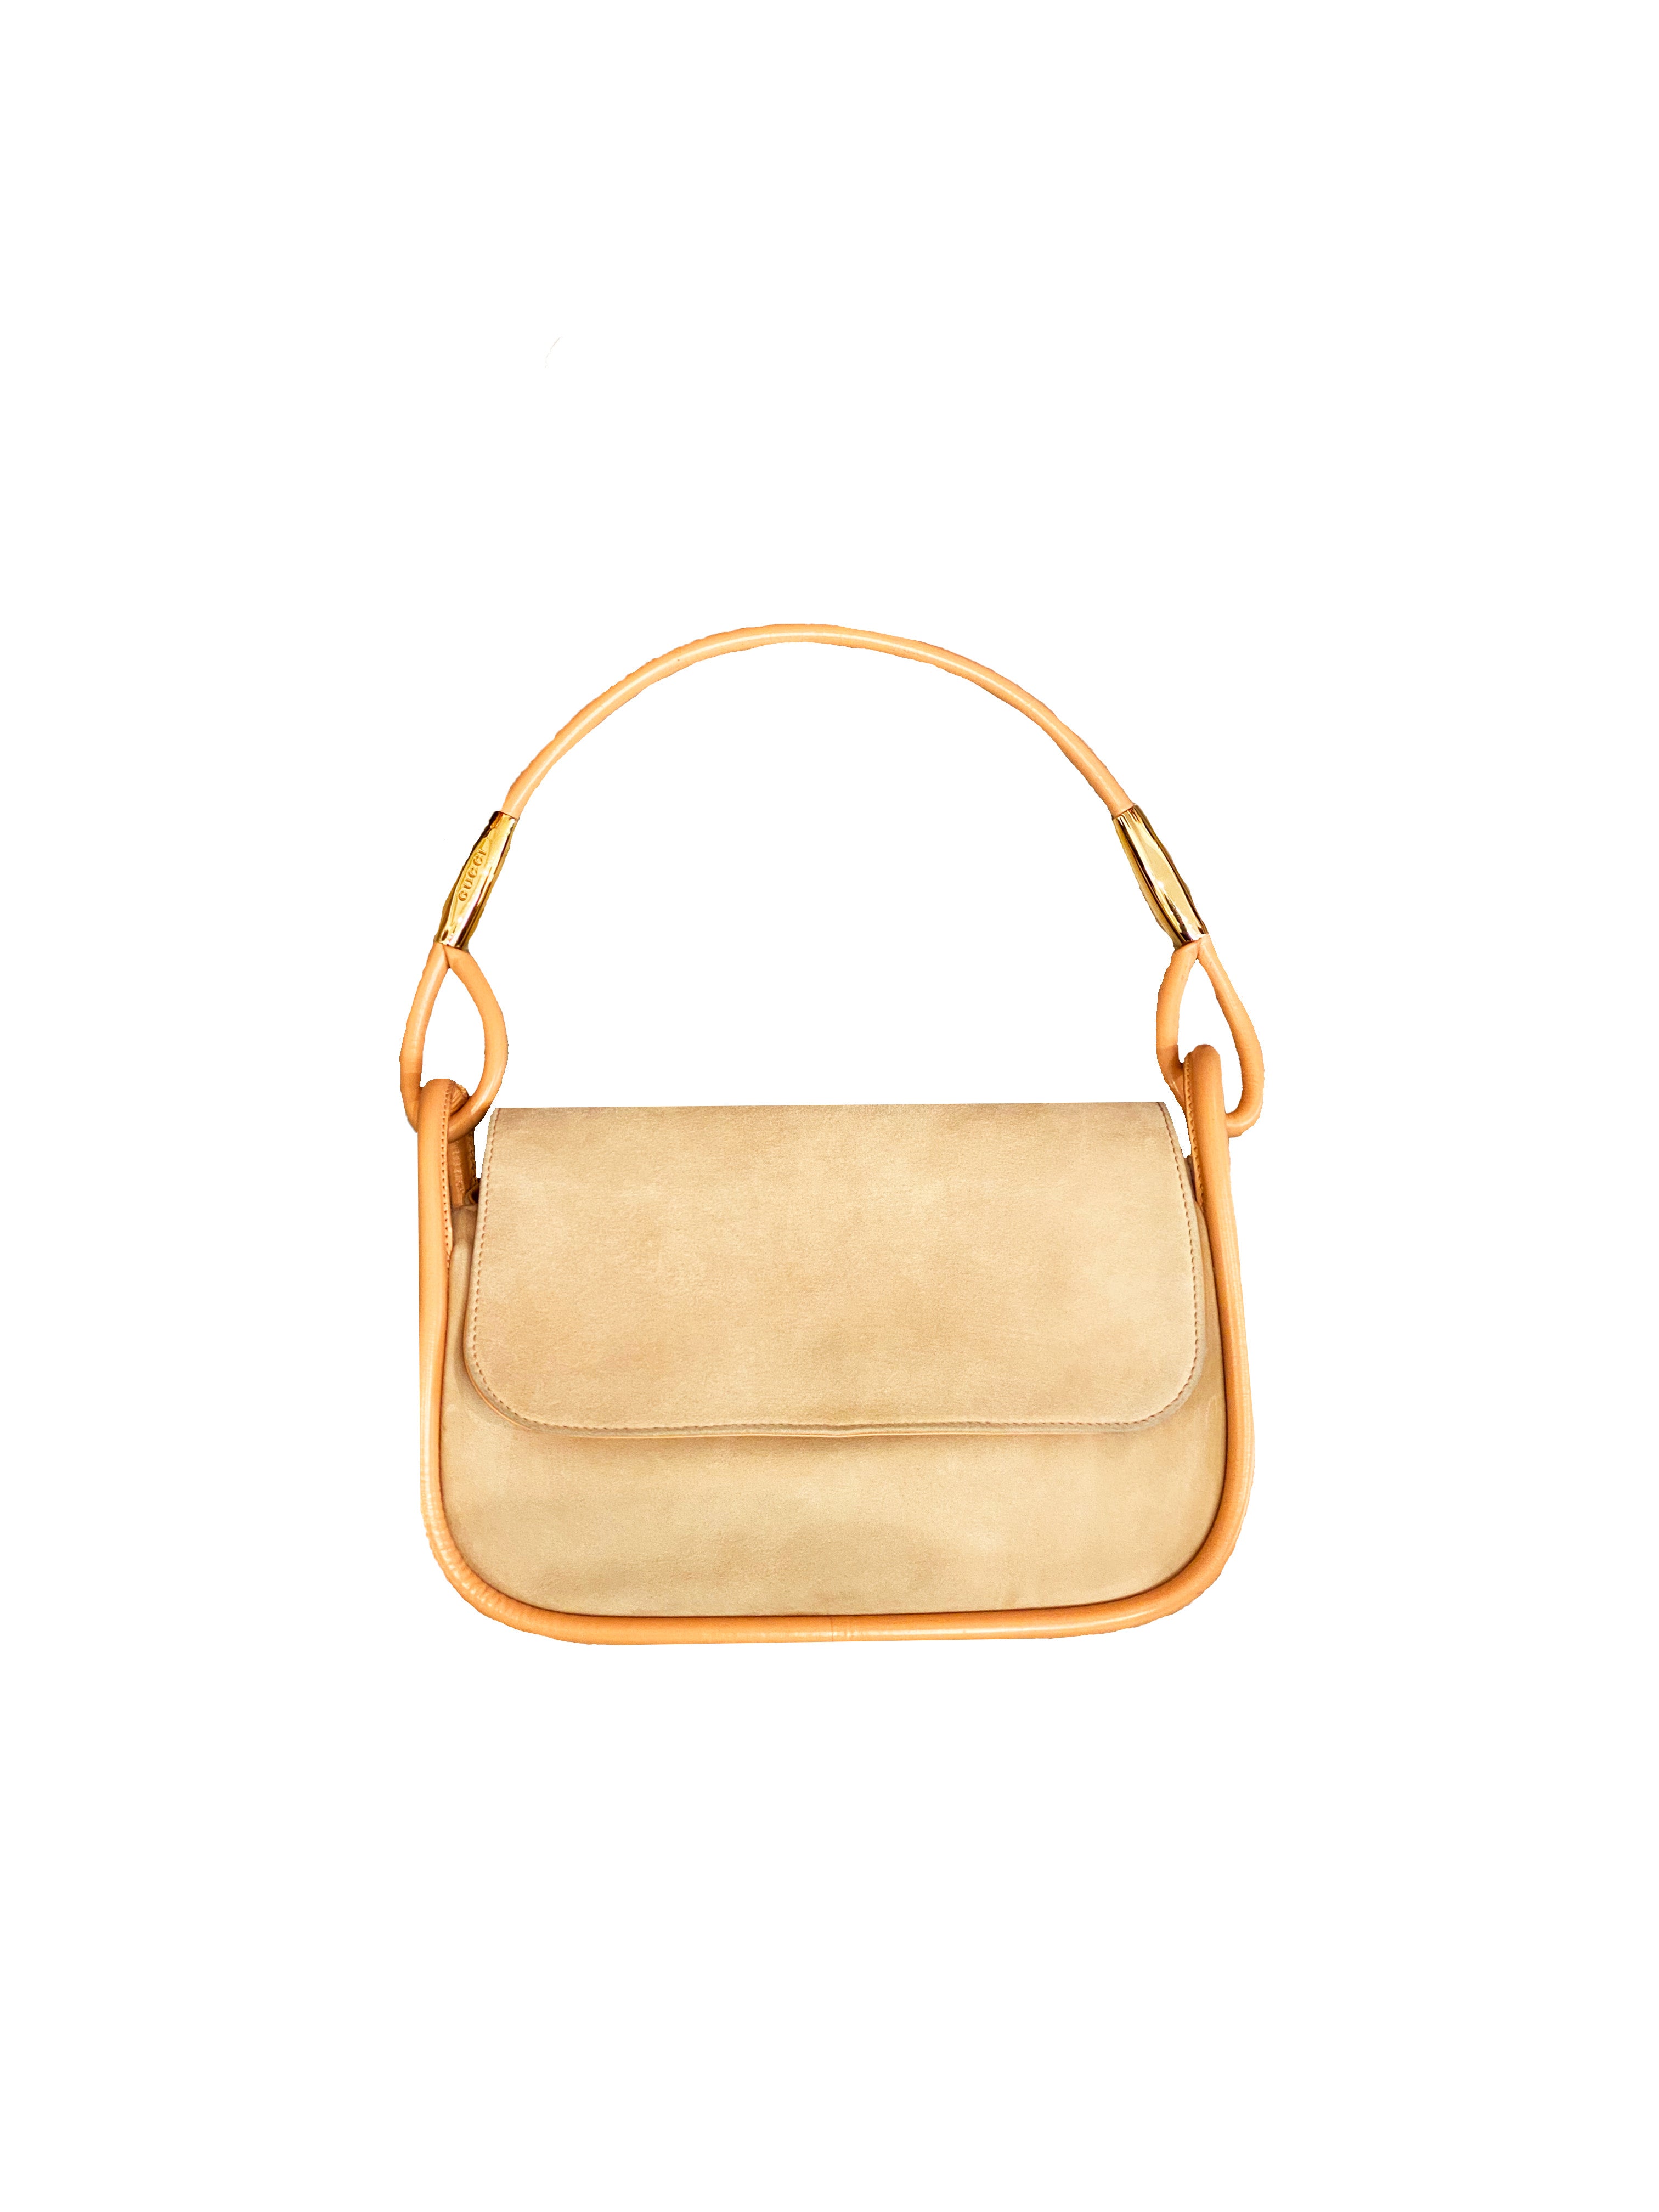 Gucci by Tom Ford 2000s Suede and Peach Loop Bag